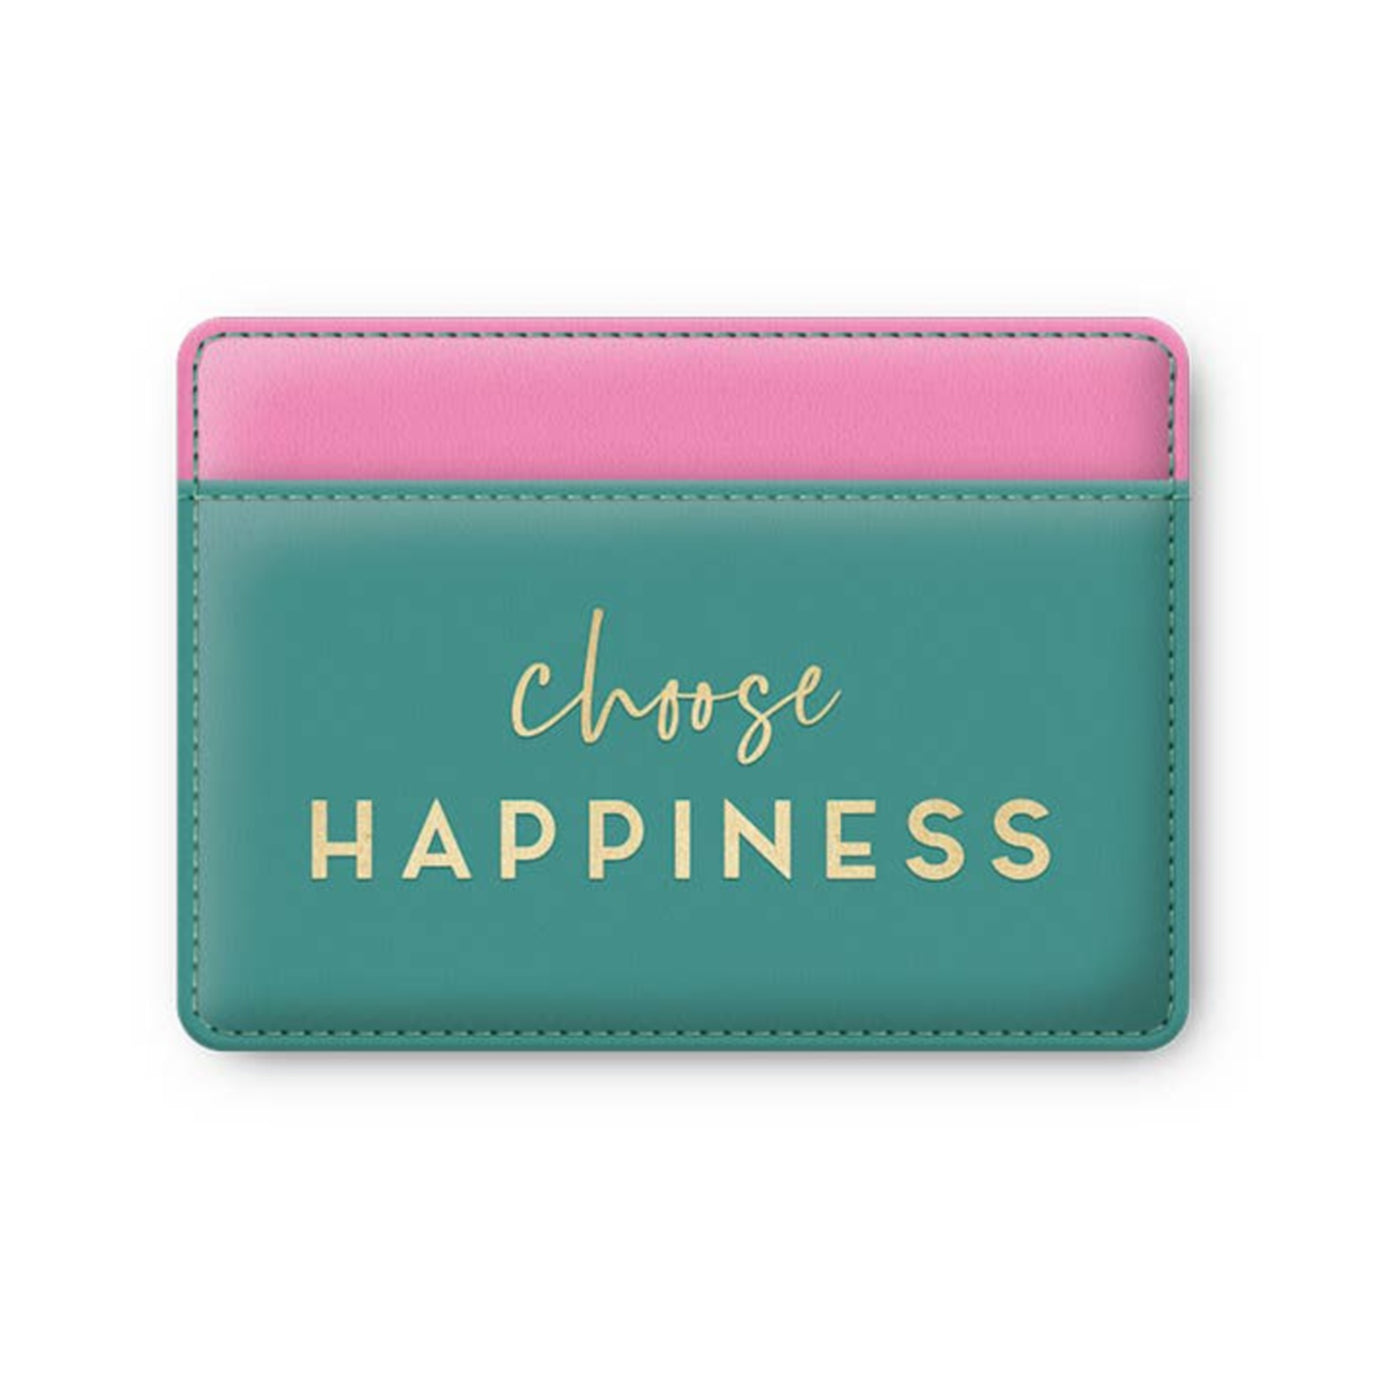 Vegan Leather Credit Card Wallet - Happiness